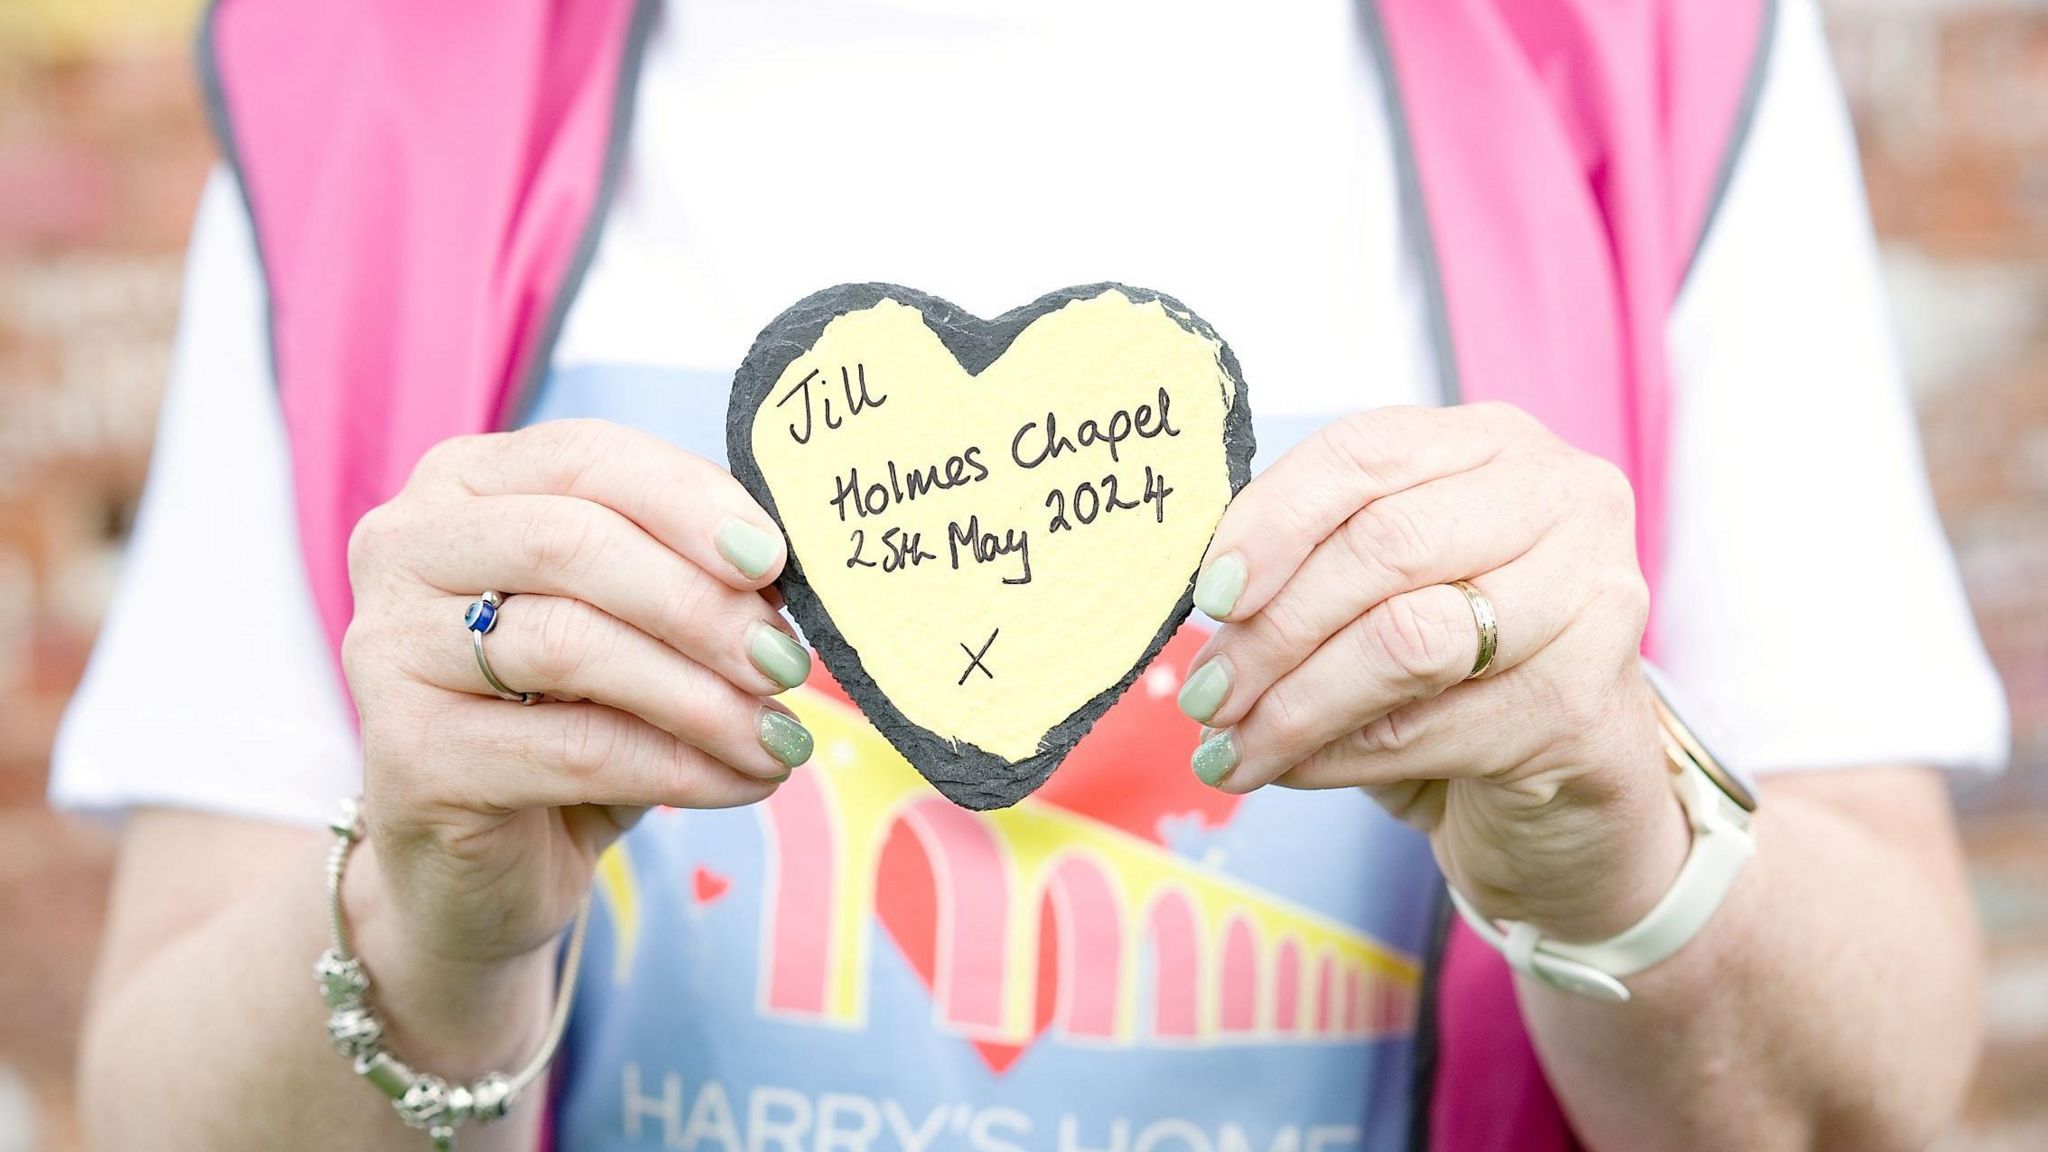 Woman holds stone heart up with the words 'Jill, Holmes Chapel, 25 May' written on it.